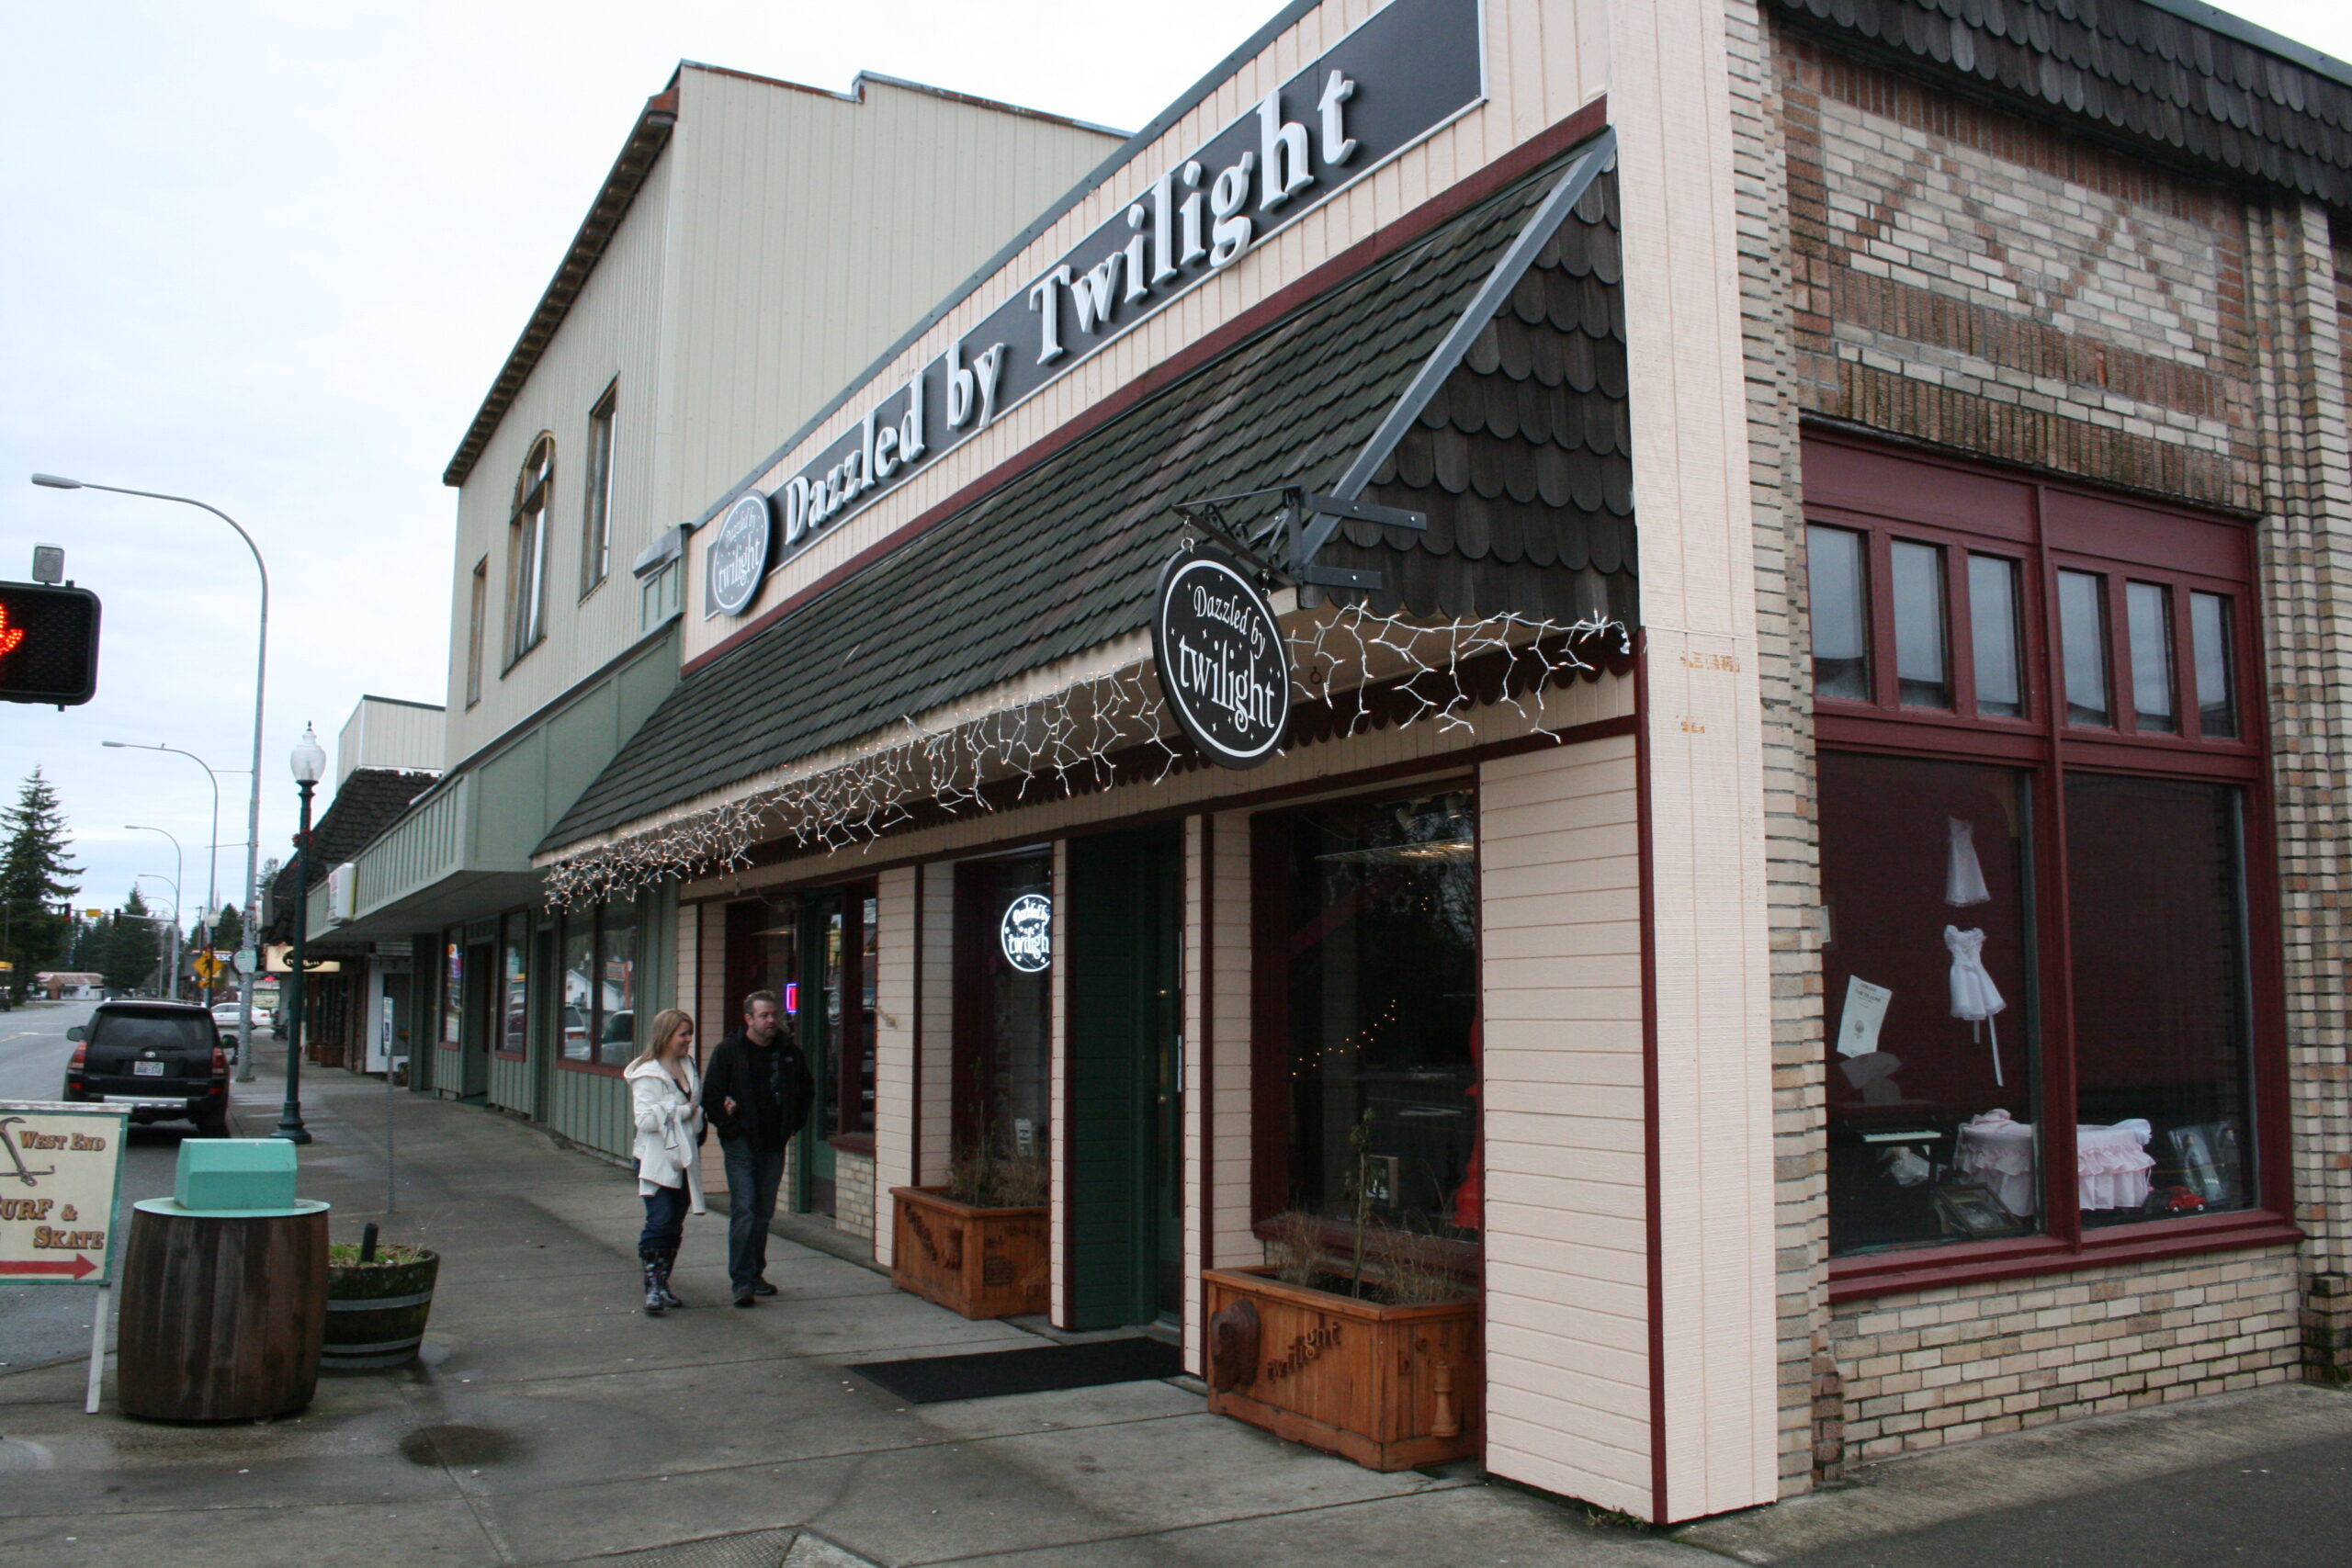 Tourists walk outside the Dazzled by Twilight store in Forks, Washington.